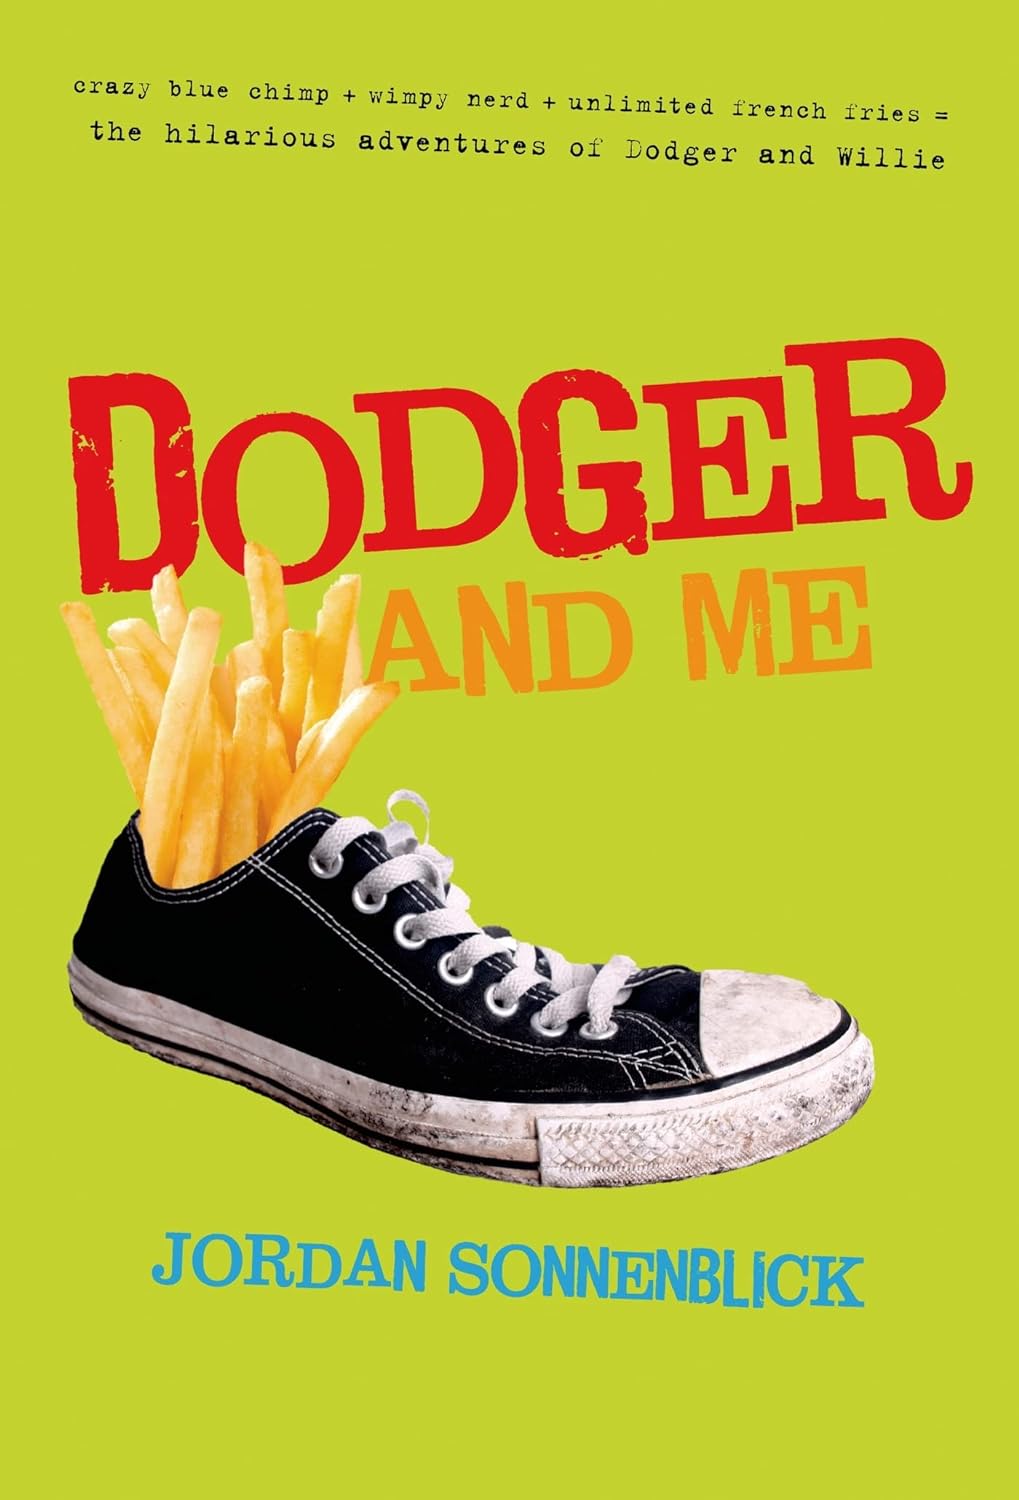 Image of "Dodger and Me".